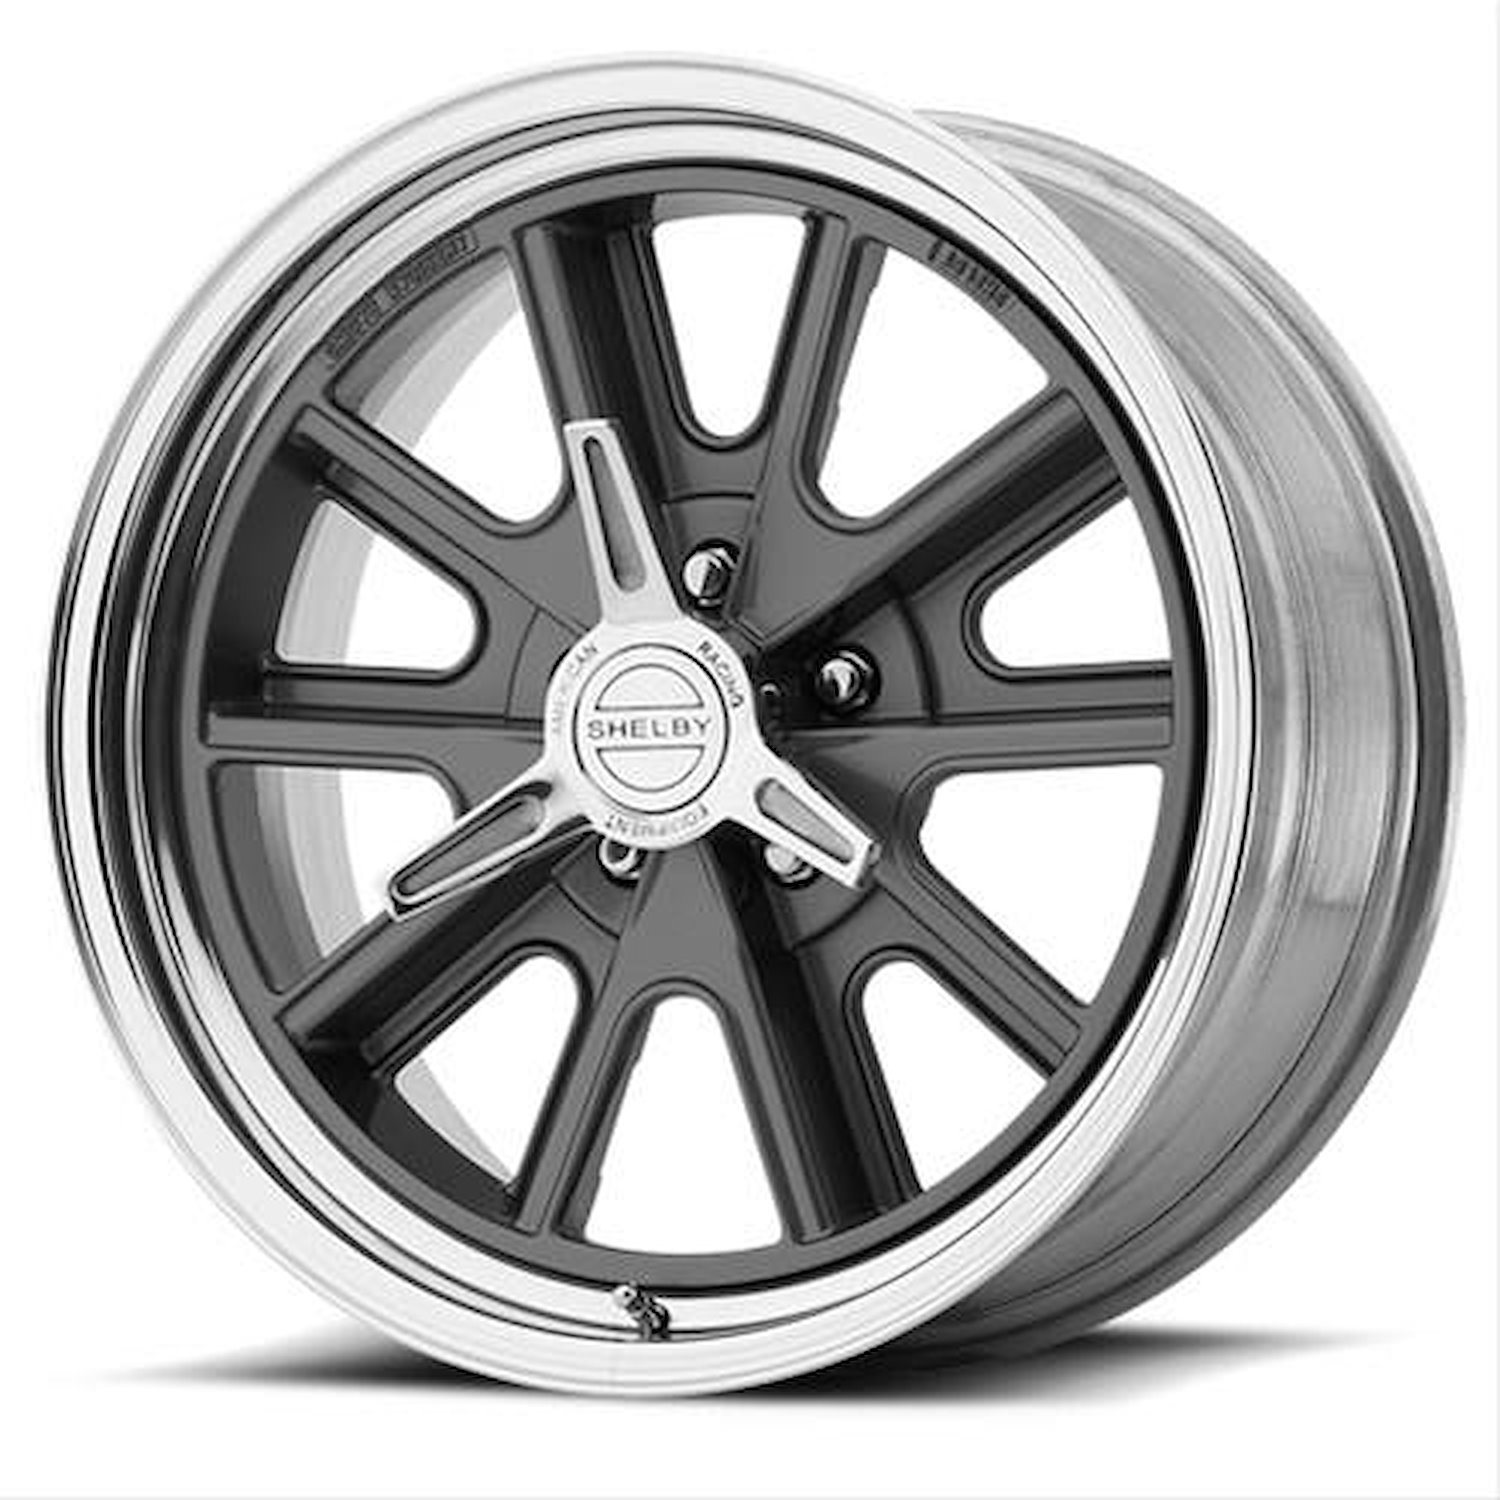 AMERICAN RACING 427 SHELBY COBRA TWO-PIECE MAG GRAY CENTER POLISHED BARREL 15 x 10 5x4.5 -44 3.77